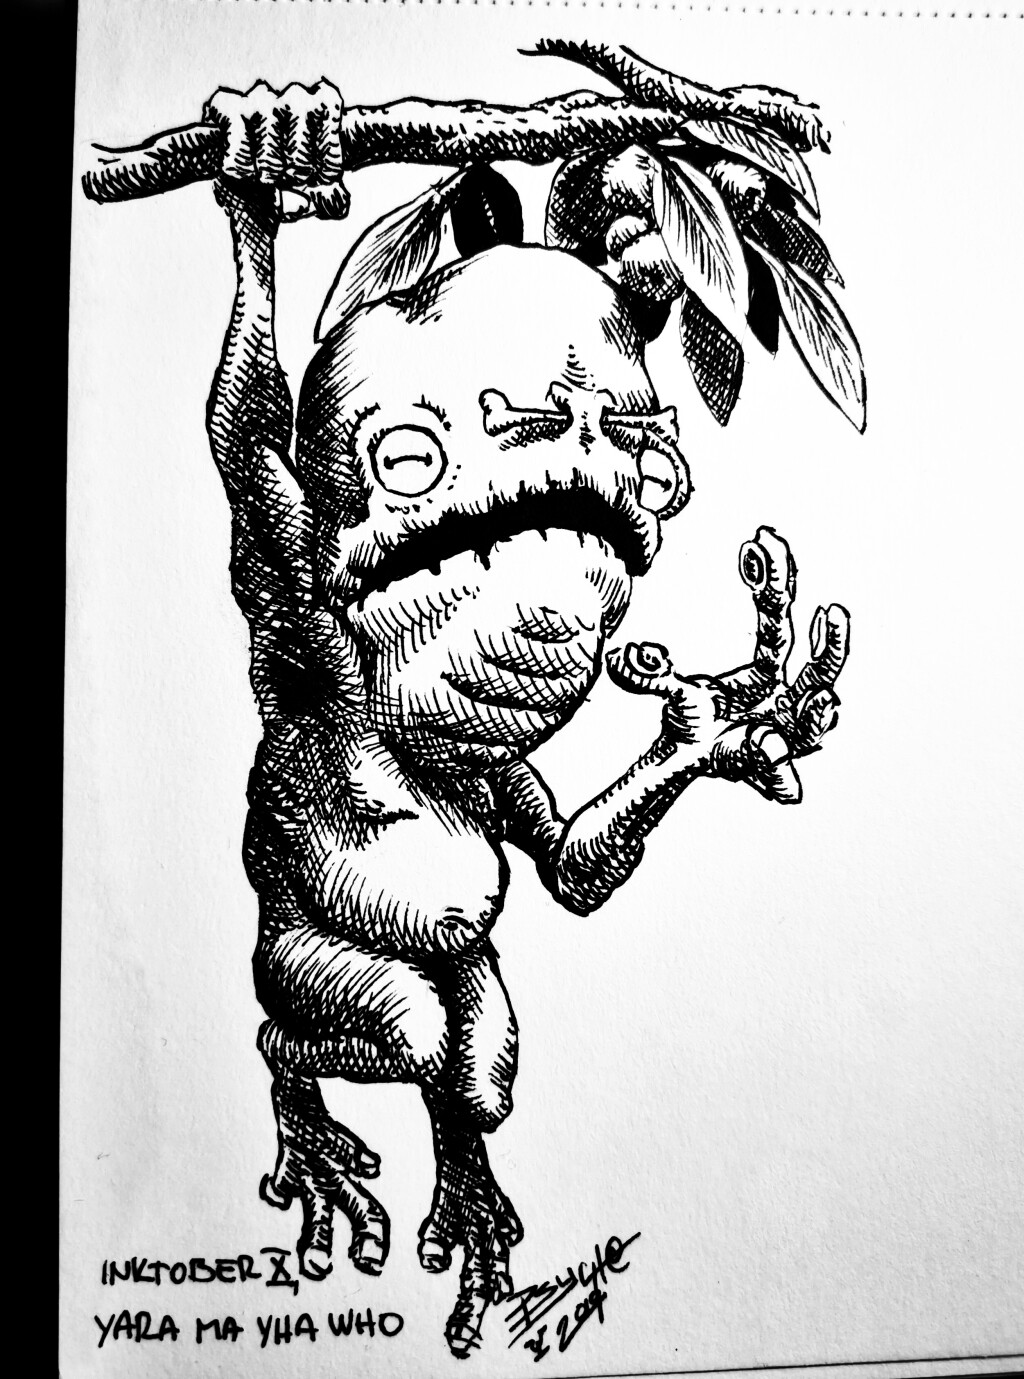 Yara Ma Yha Who - Short monkey man with bloated head and gaping frog mouth that waits in top of fig trees for its victims to suck their blood with its octopus like suckers on tips of its fingers and then devour them whole.